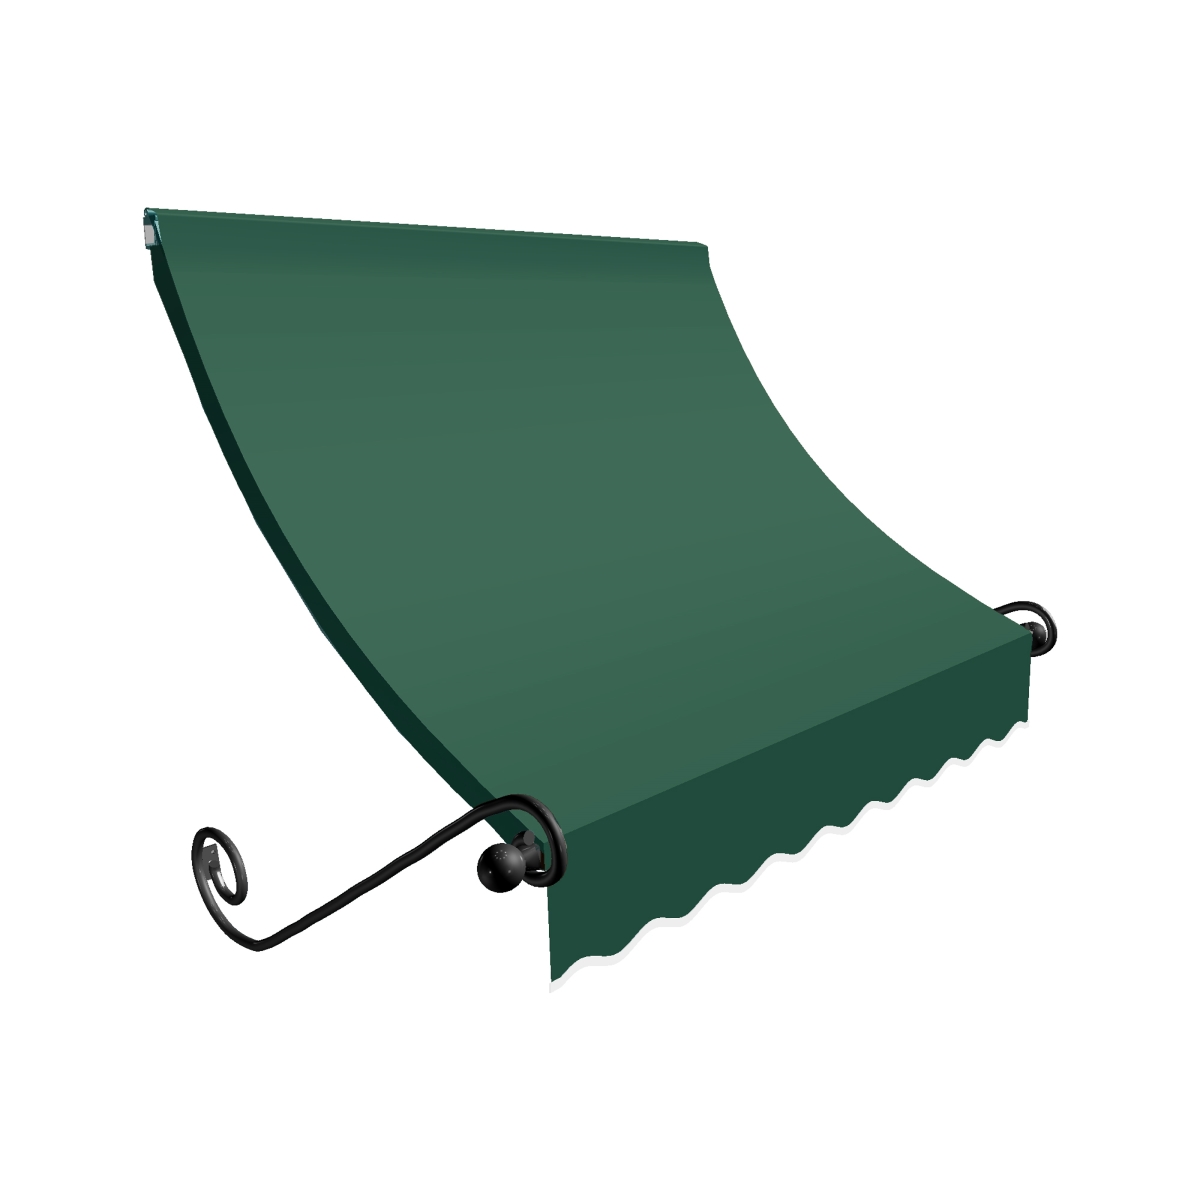 Ch22-us-6f 6.38 Ft. Charleston Window & Entry Awning, Forest Green - 31 X 24 In.